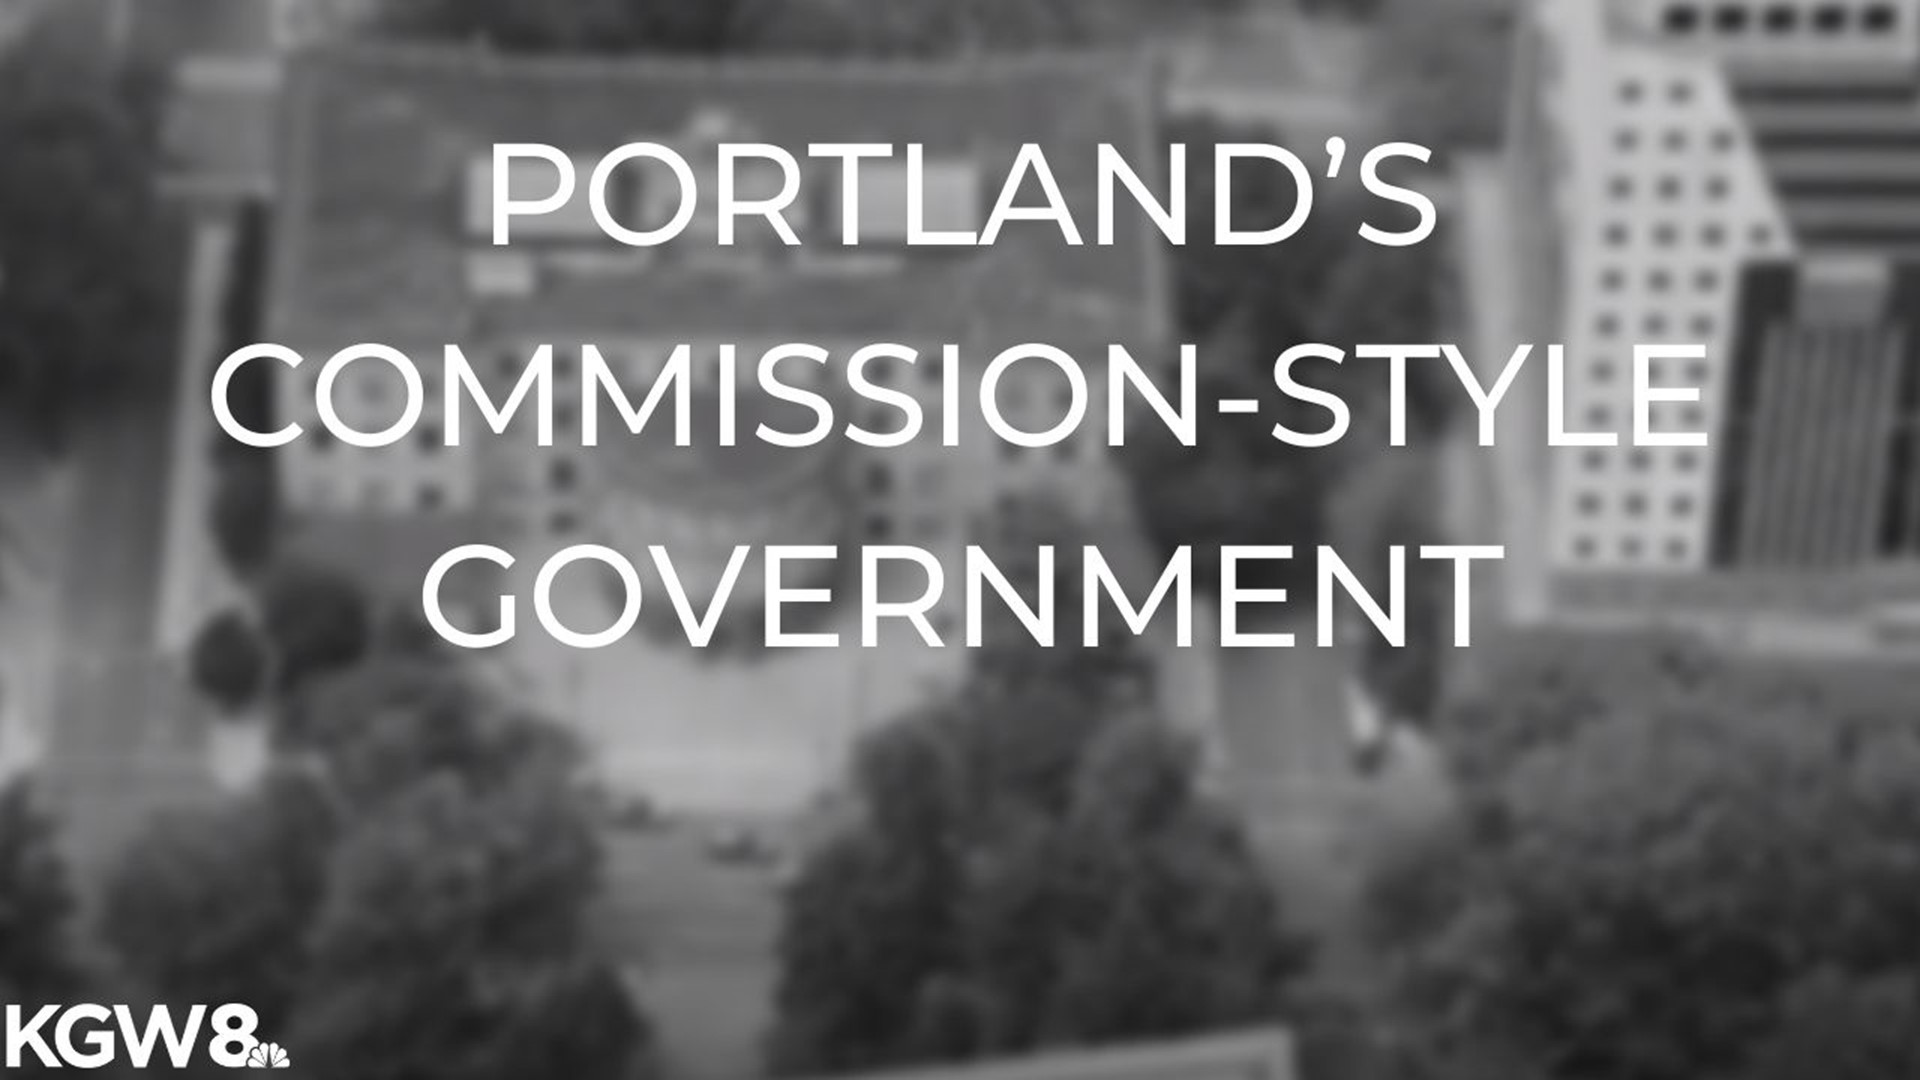 In May of 1913, Portlanders voted and our commission government was formed. Now, 107 years later it still stands alone.